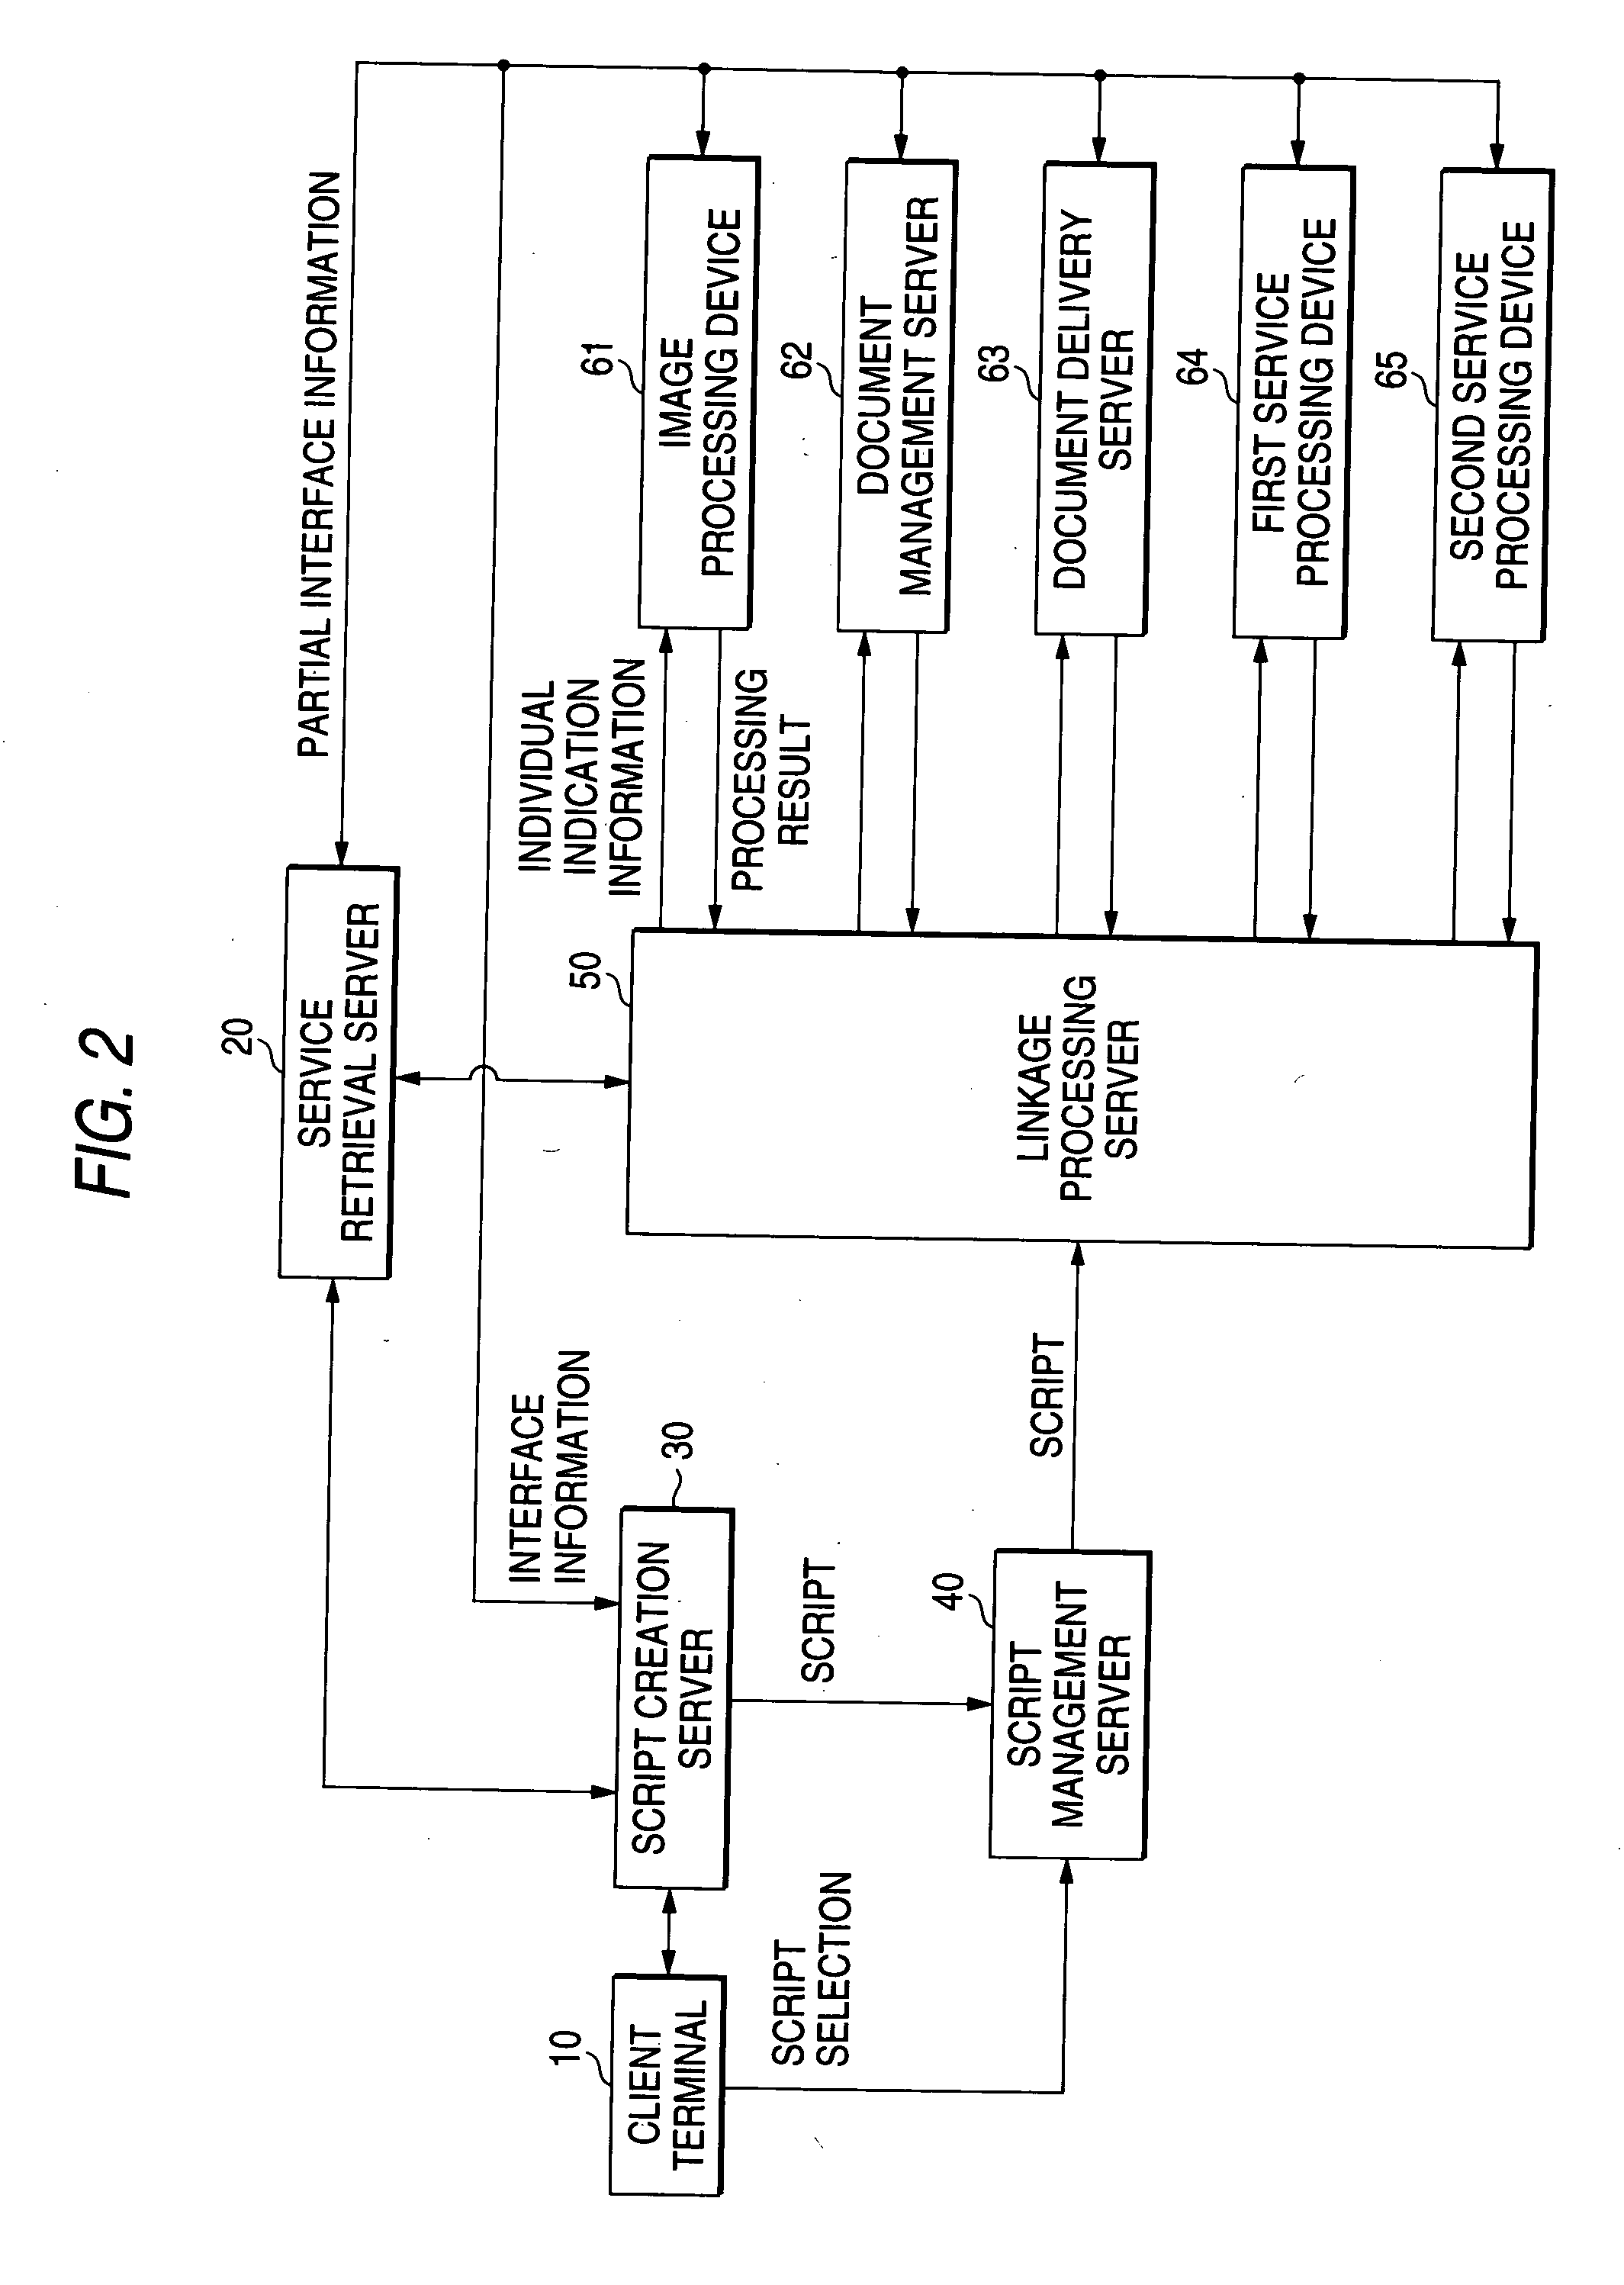 Service processing device and method